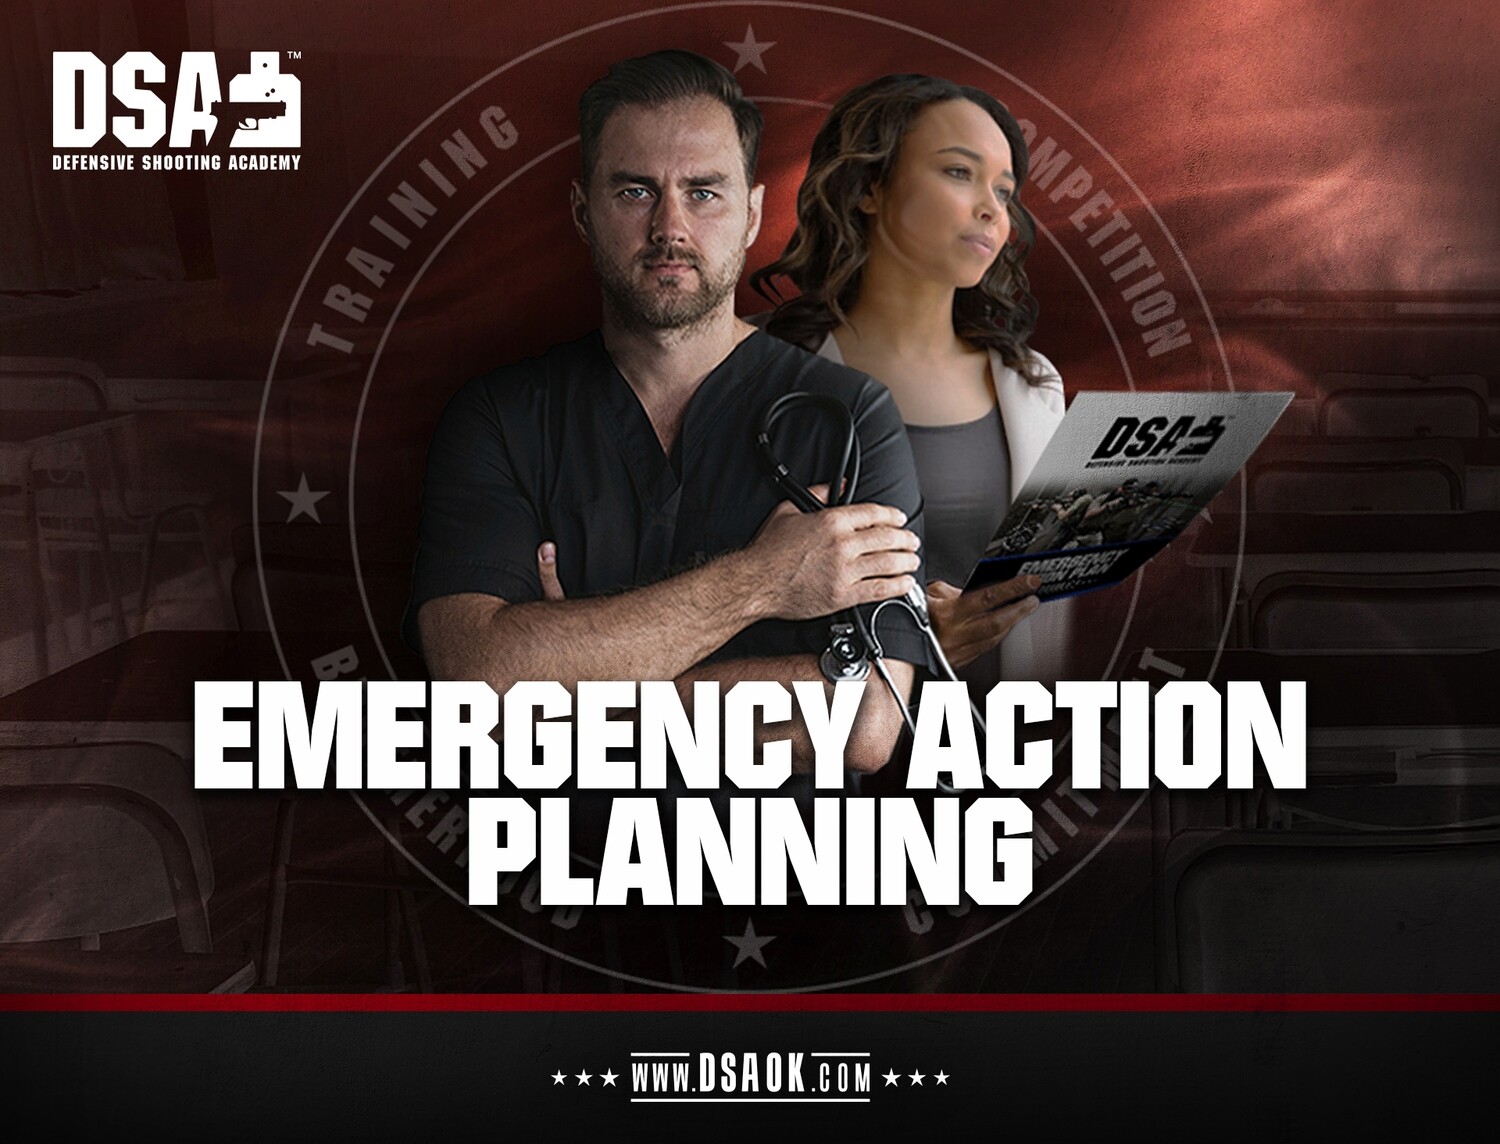 EMERGENCY ACTION PLANNING